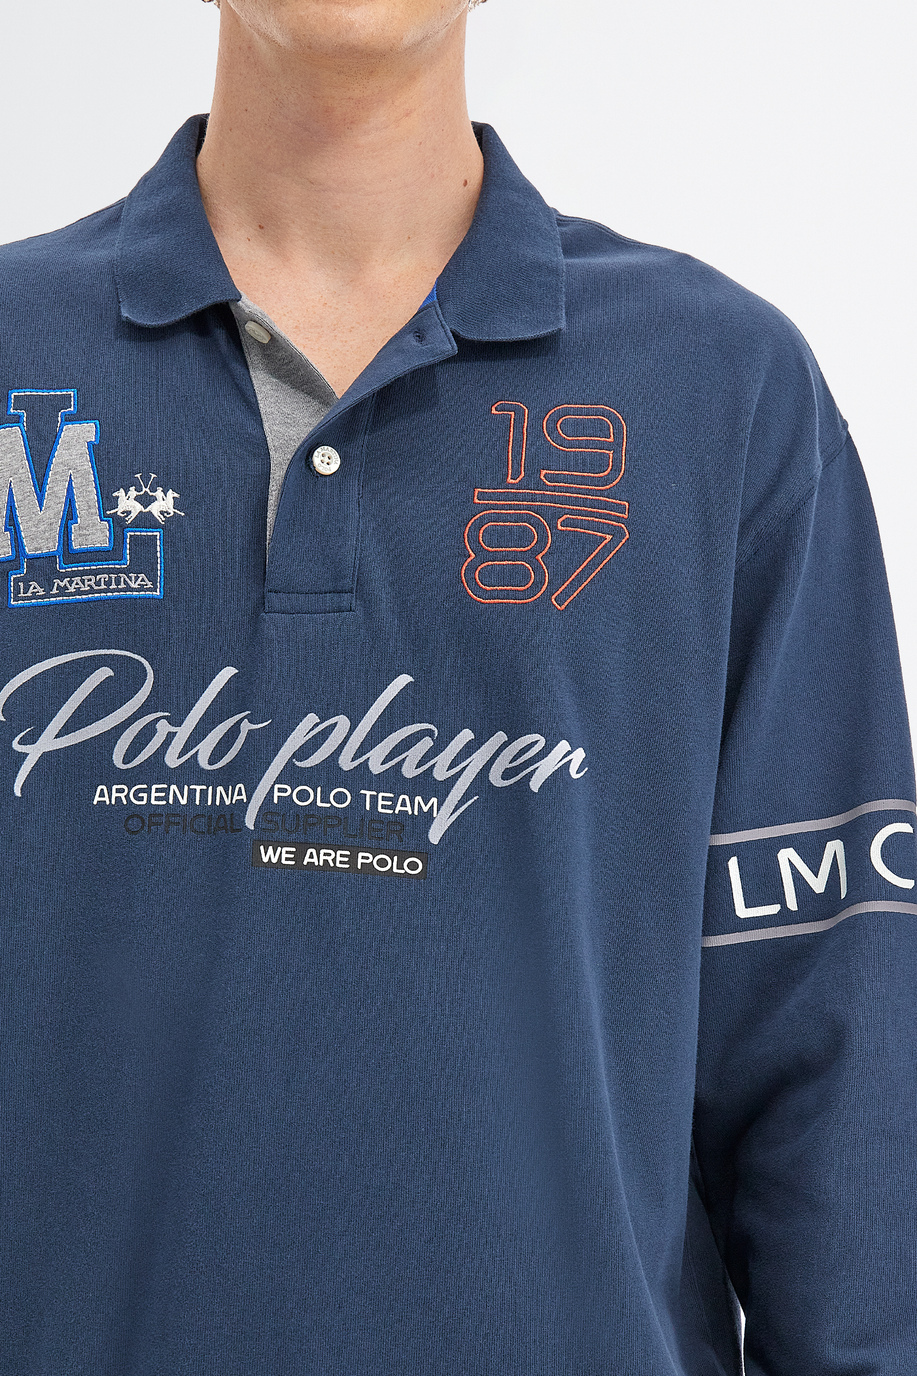 Polo uomo Inmortales in cotone jersey maniche lunghe comfort fit - Comfort fit | La Martina - Official Online Shop